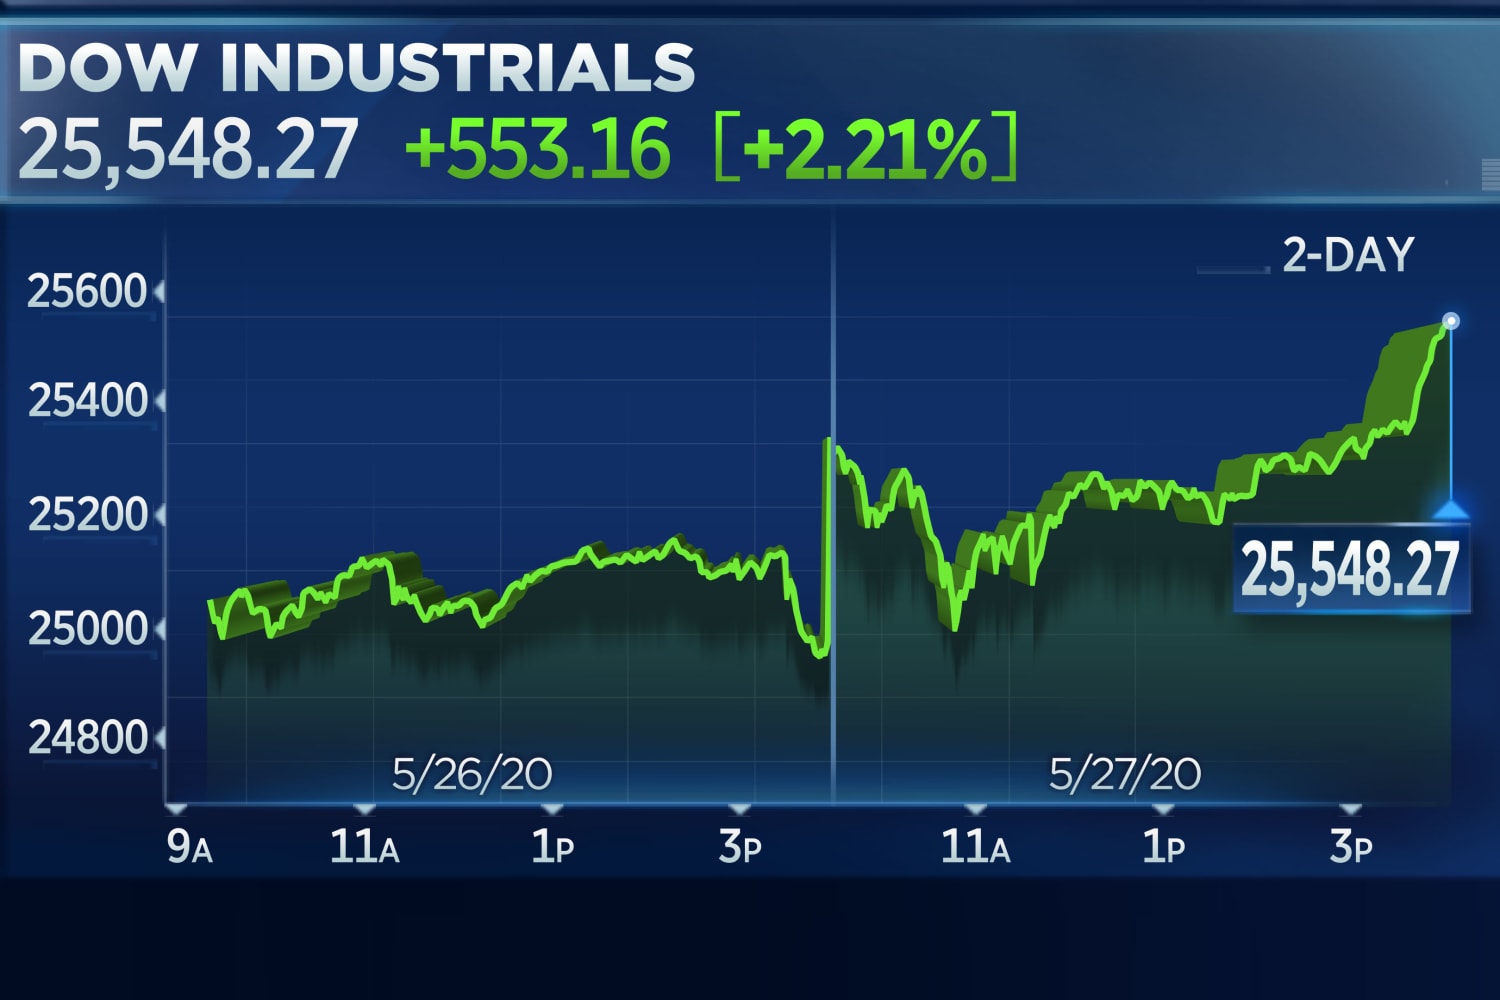 Dow rallies more than 500 points for a second day, closes above 25,000 for first time since March